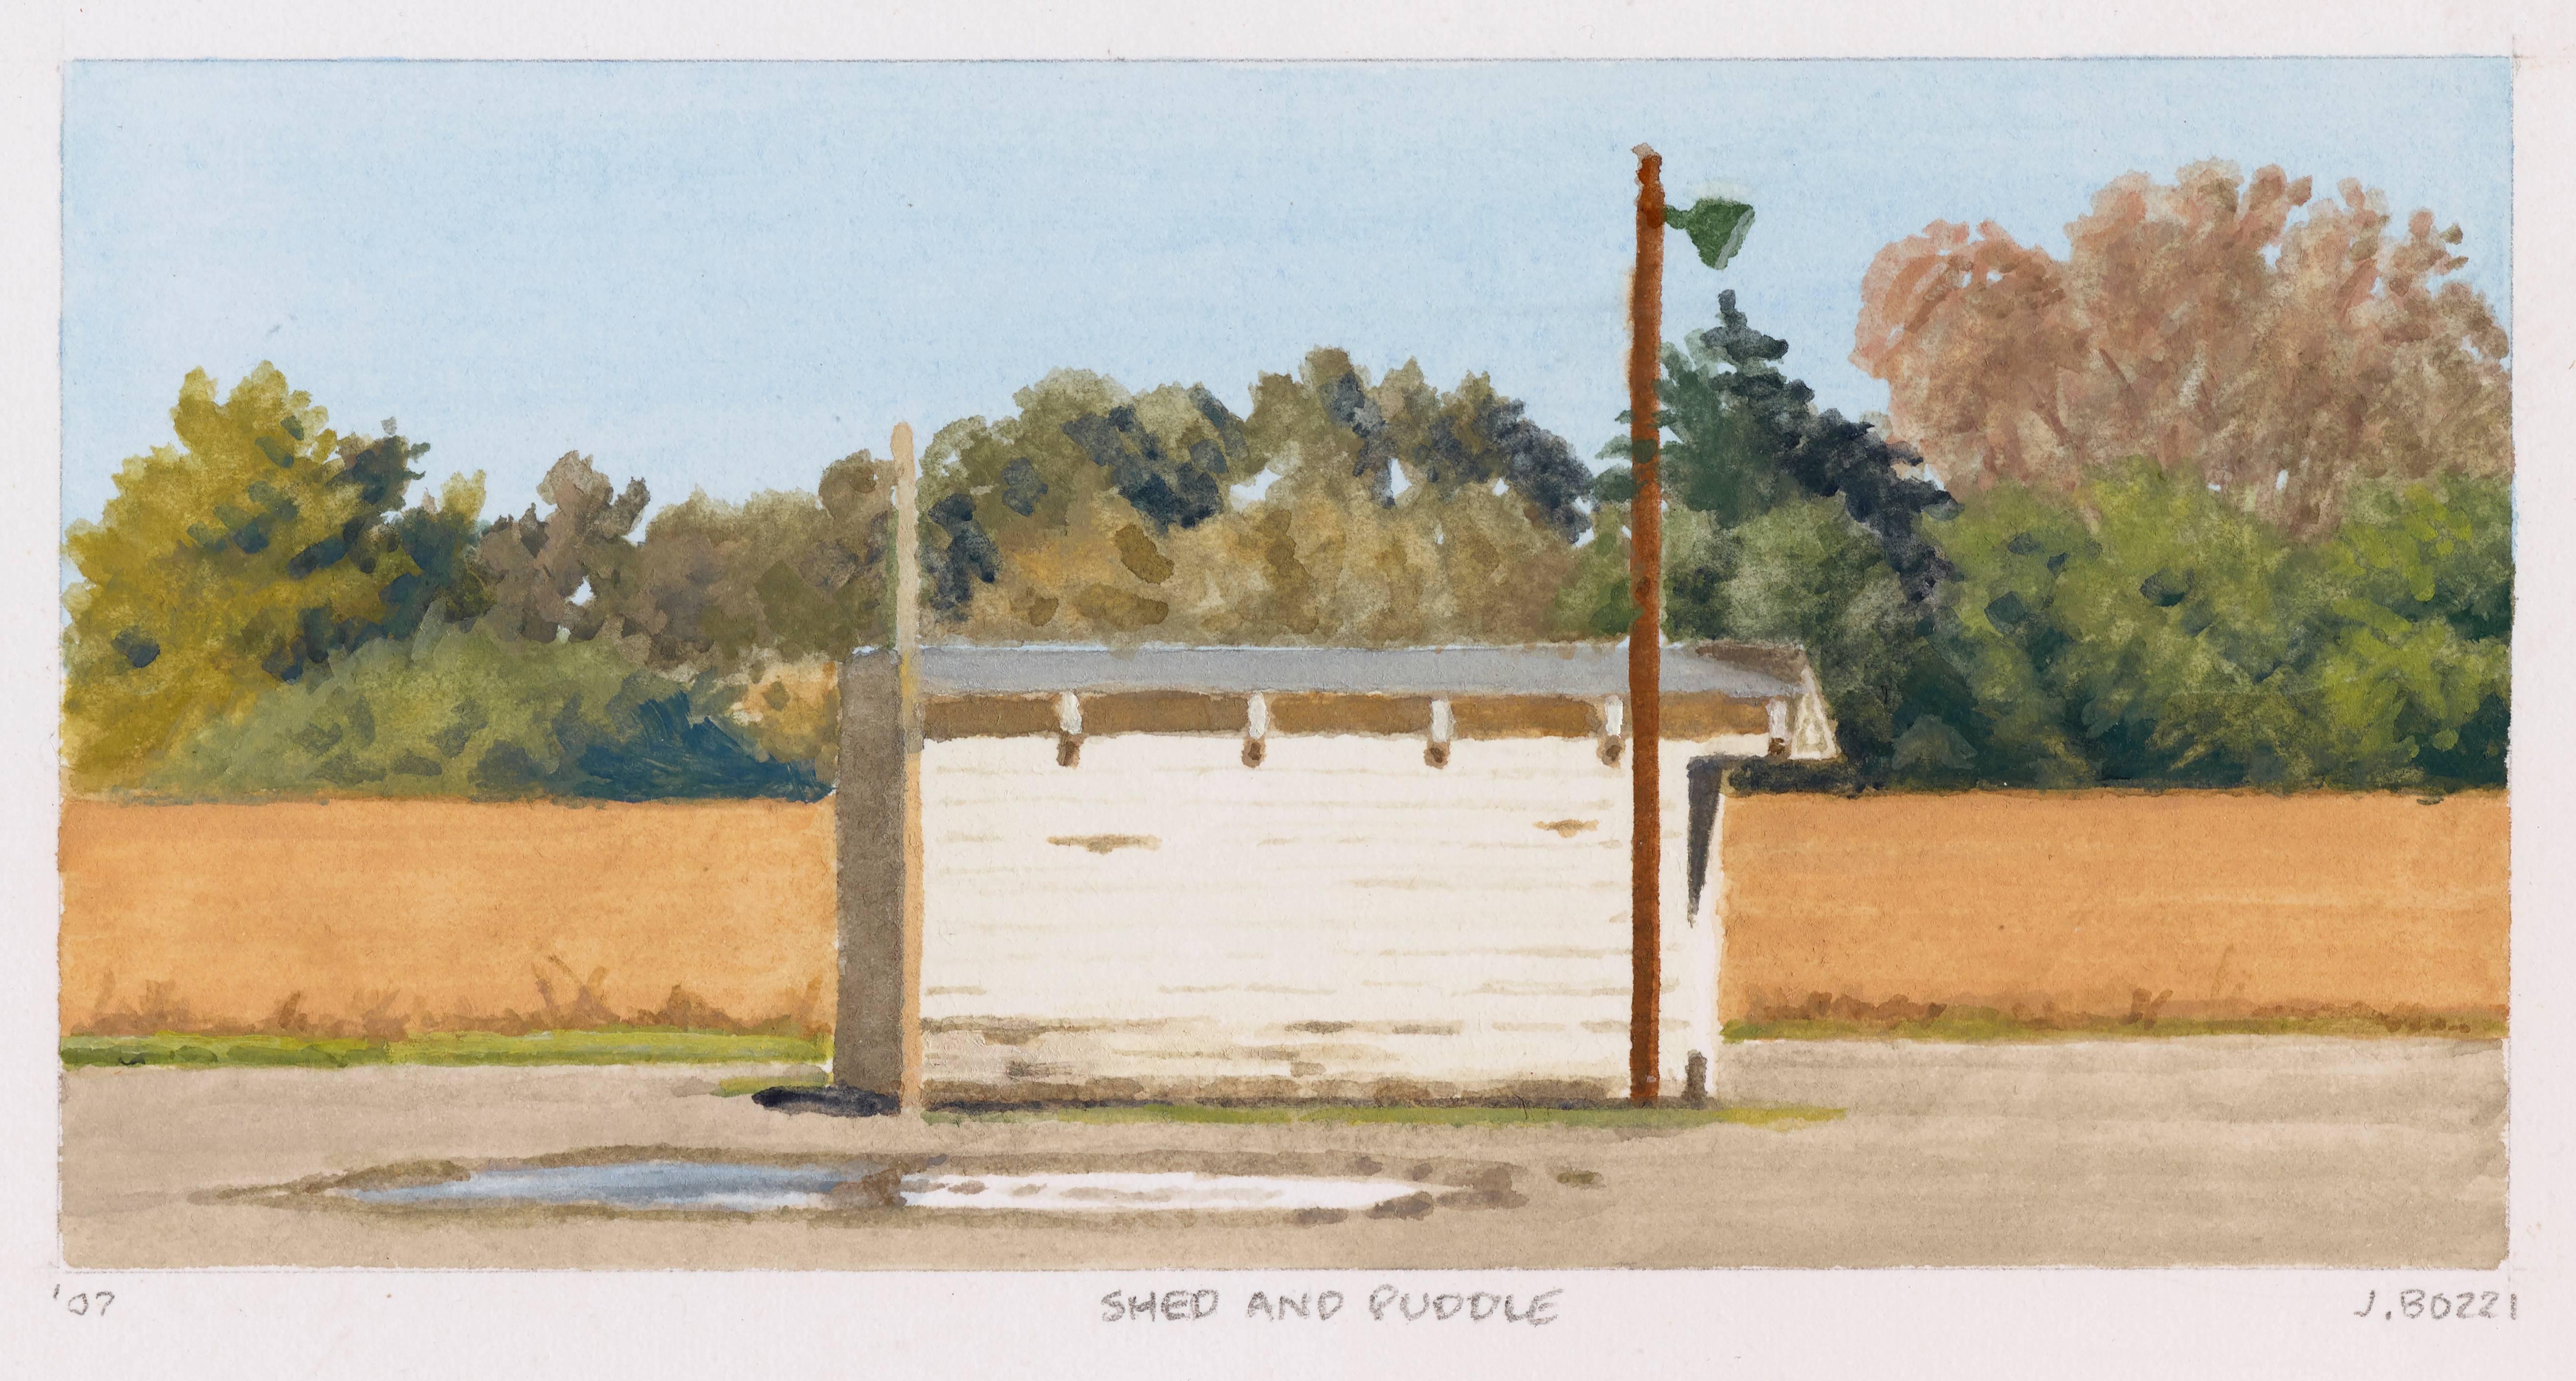 Shed and Puddle - Art by Julie Bozzi